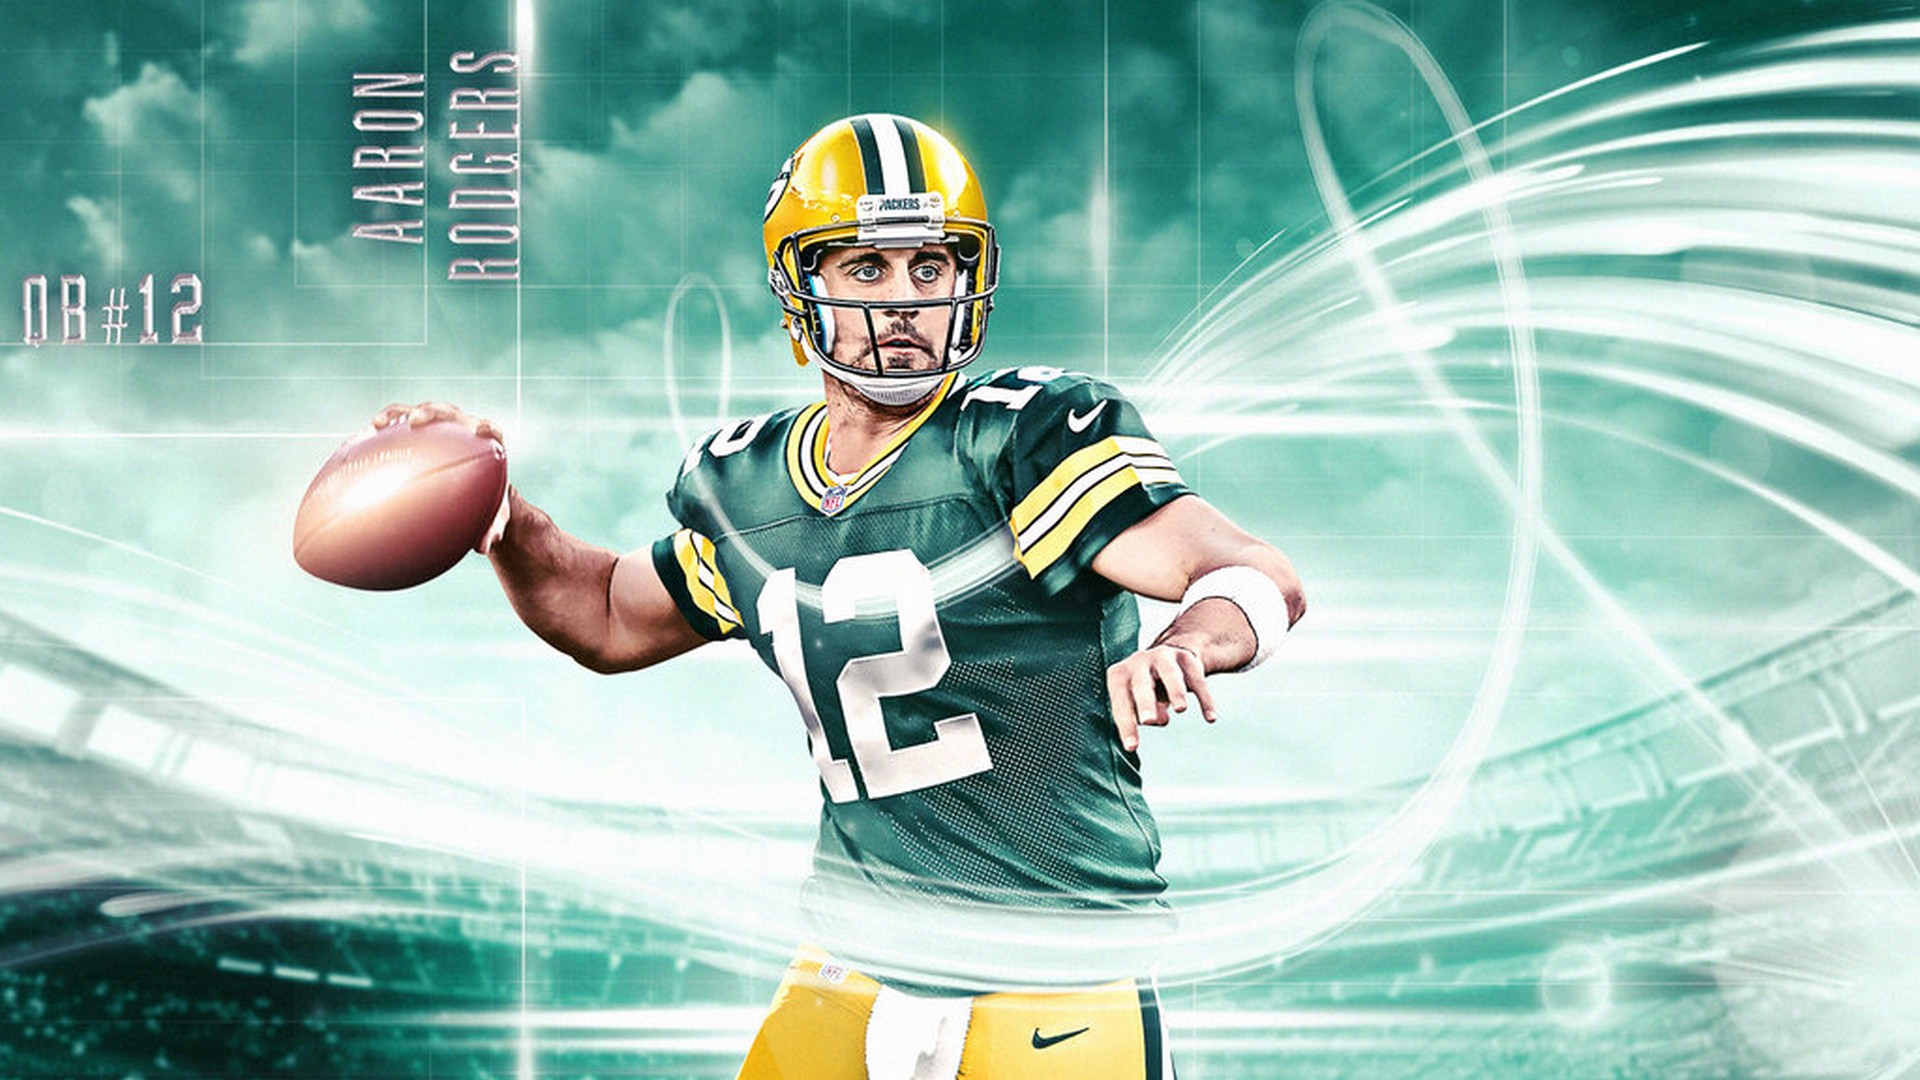 Aaron Rodgers For PC Wallpaper with high-resolution 1920x1080 pixel. You can use this wallpaper for your Mac or Windows Desktop Background, iPhone, Android or Tablet and another Smartphone device